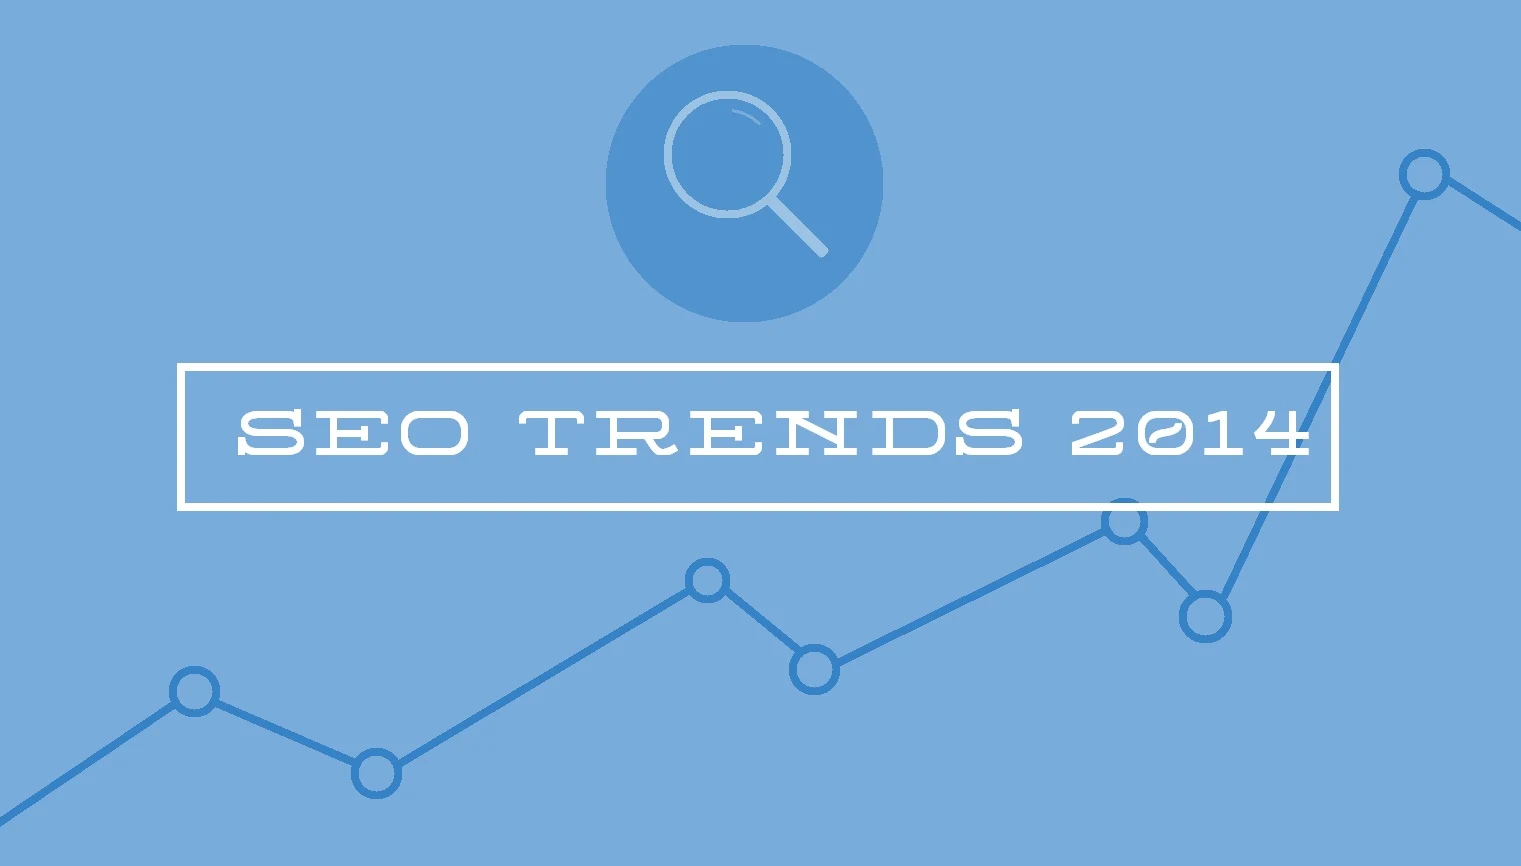 Search Engine Marketing Trends 2014 - infographic